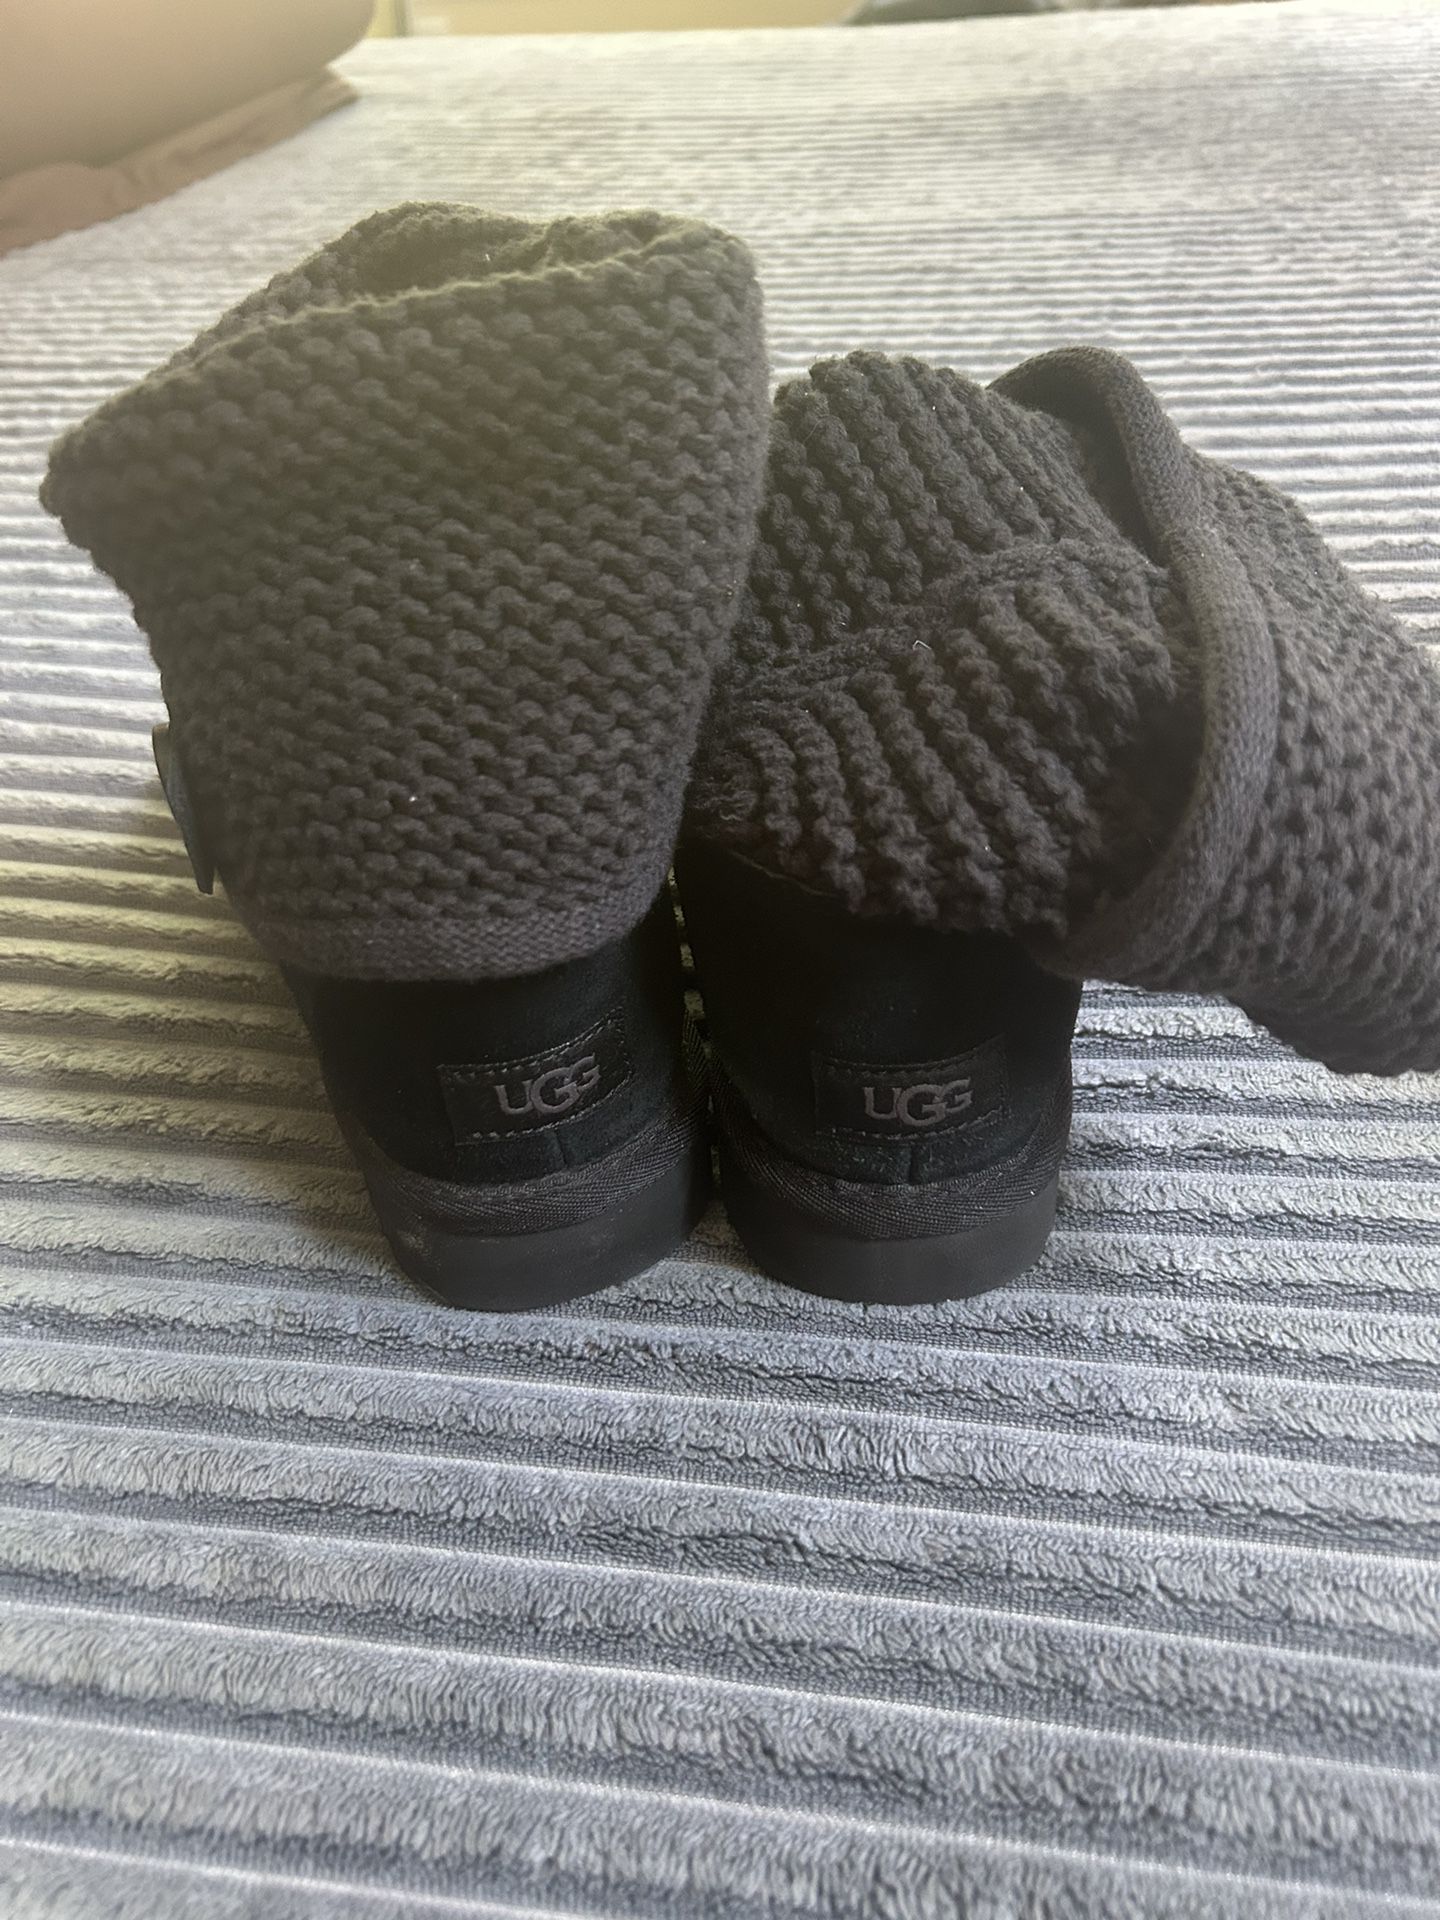 Ugg Boots Size: